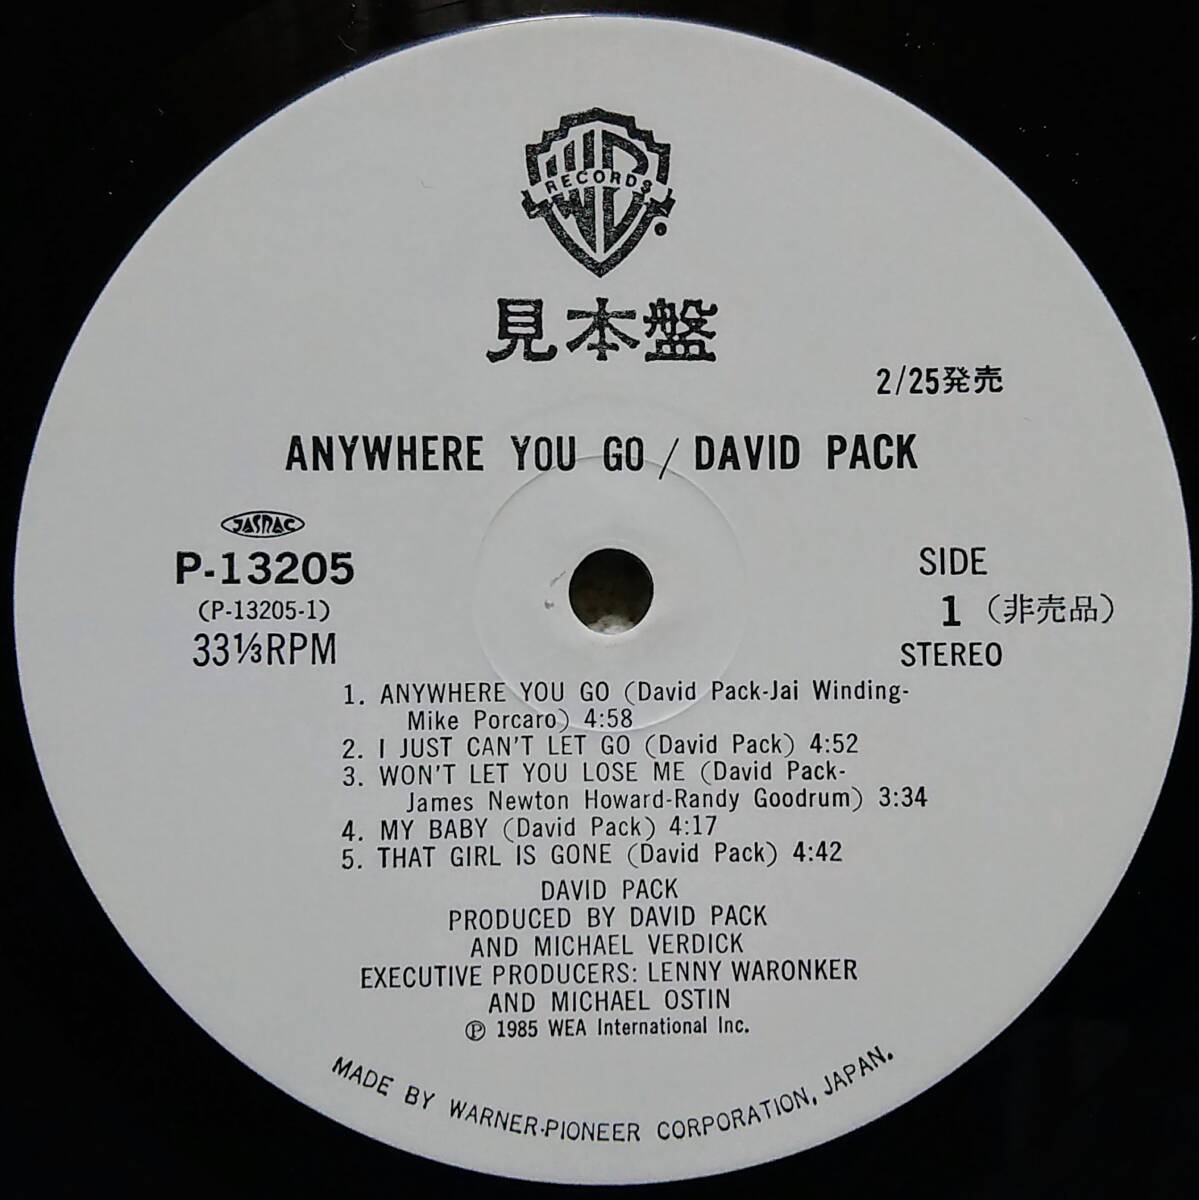 【LP AOR】David Pack「Anywhere You Go....」Promo JPN盤 白プロモ I Just Can't Let Go feat.James Ingram.Michael McDonald 他 収録！_Side1